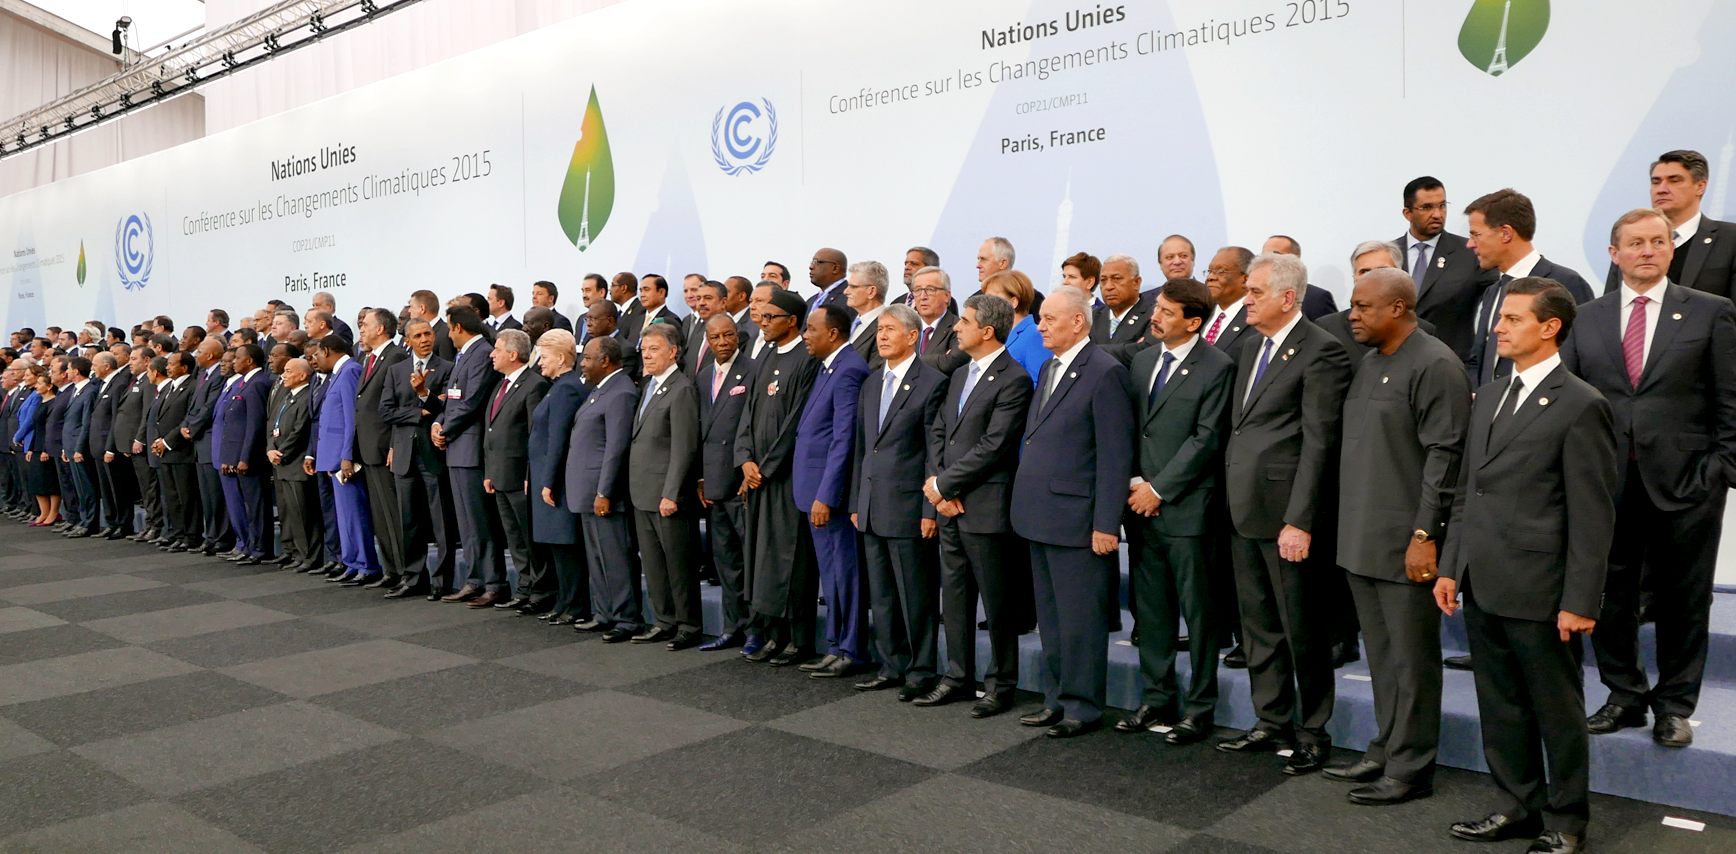 COP 21 participants conferences of the parties, United Nations